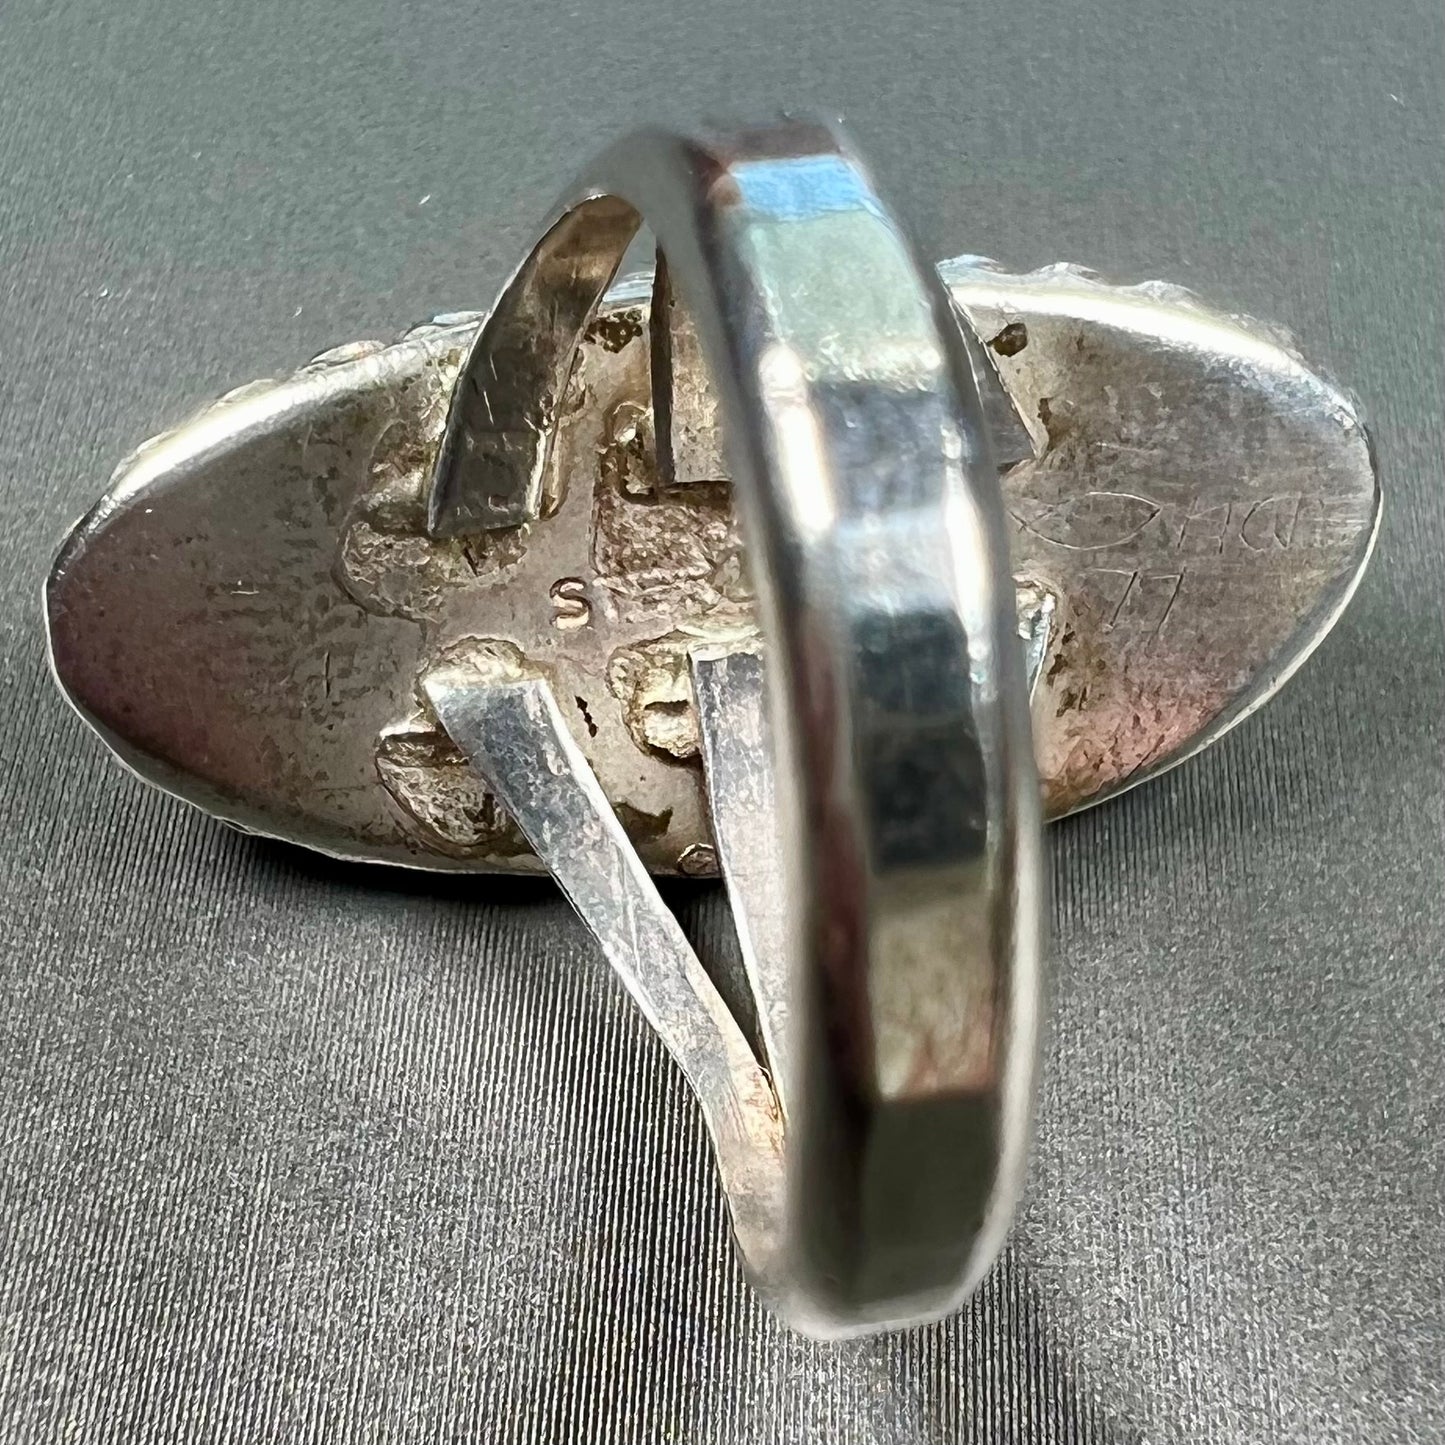 A split shank silver ring set with a brown sard stone in a rope bezel with small prongs.